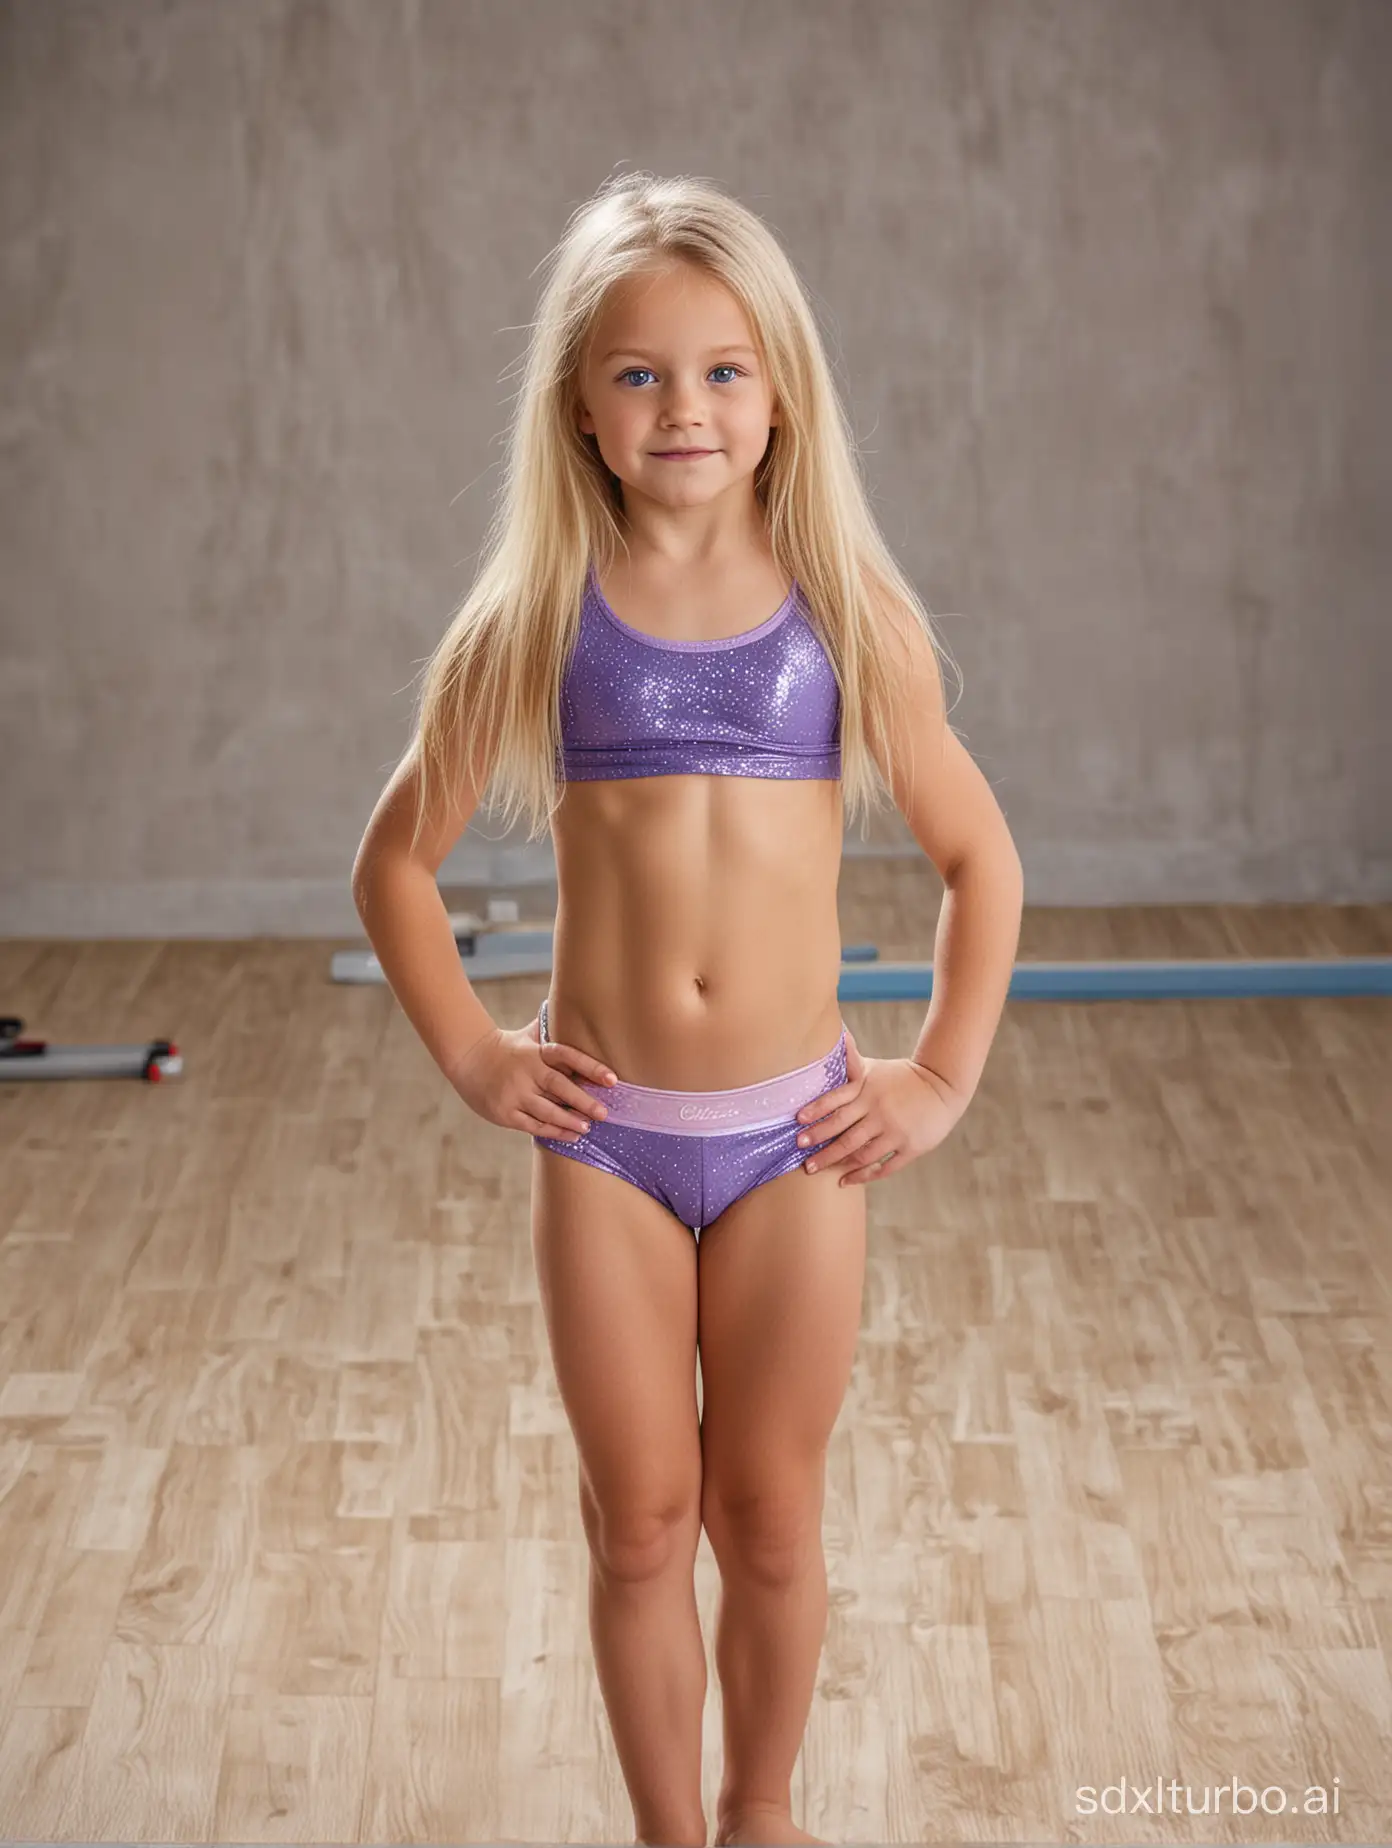 Young-Gymnast-Girl-with-Blond-Hair-Performing-on-Balance-Beam